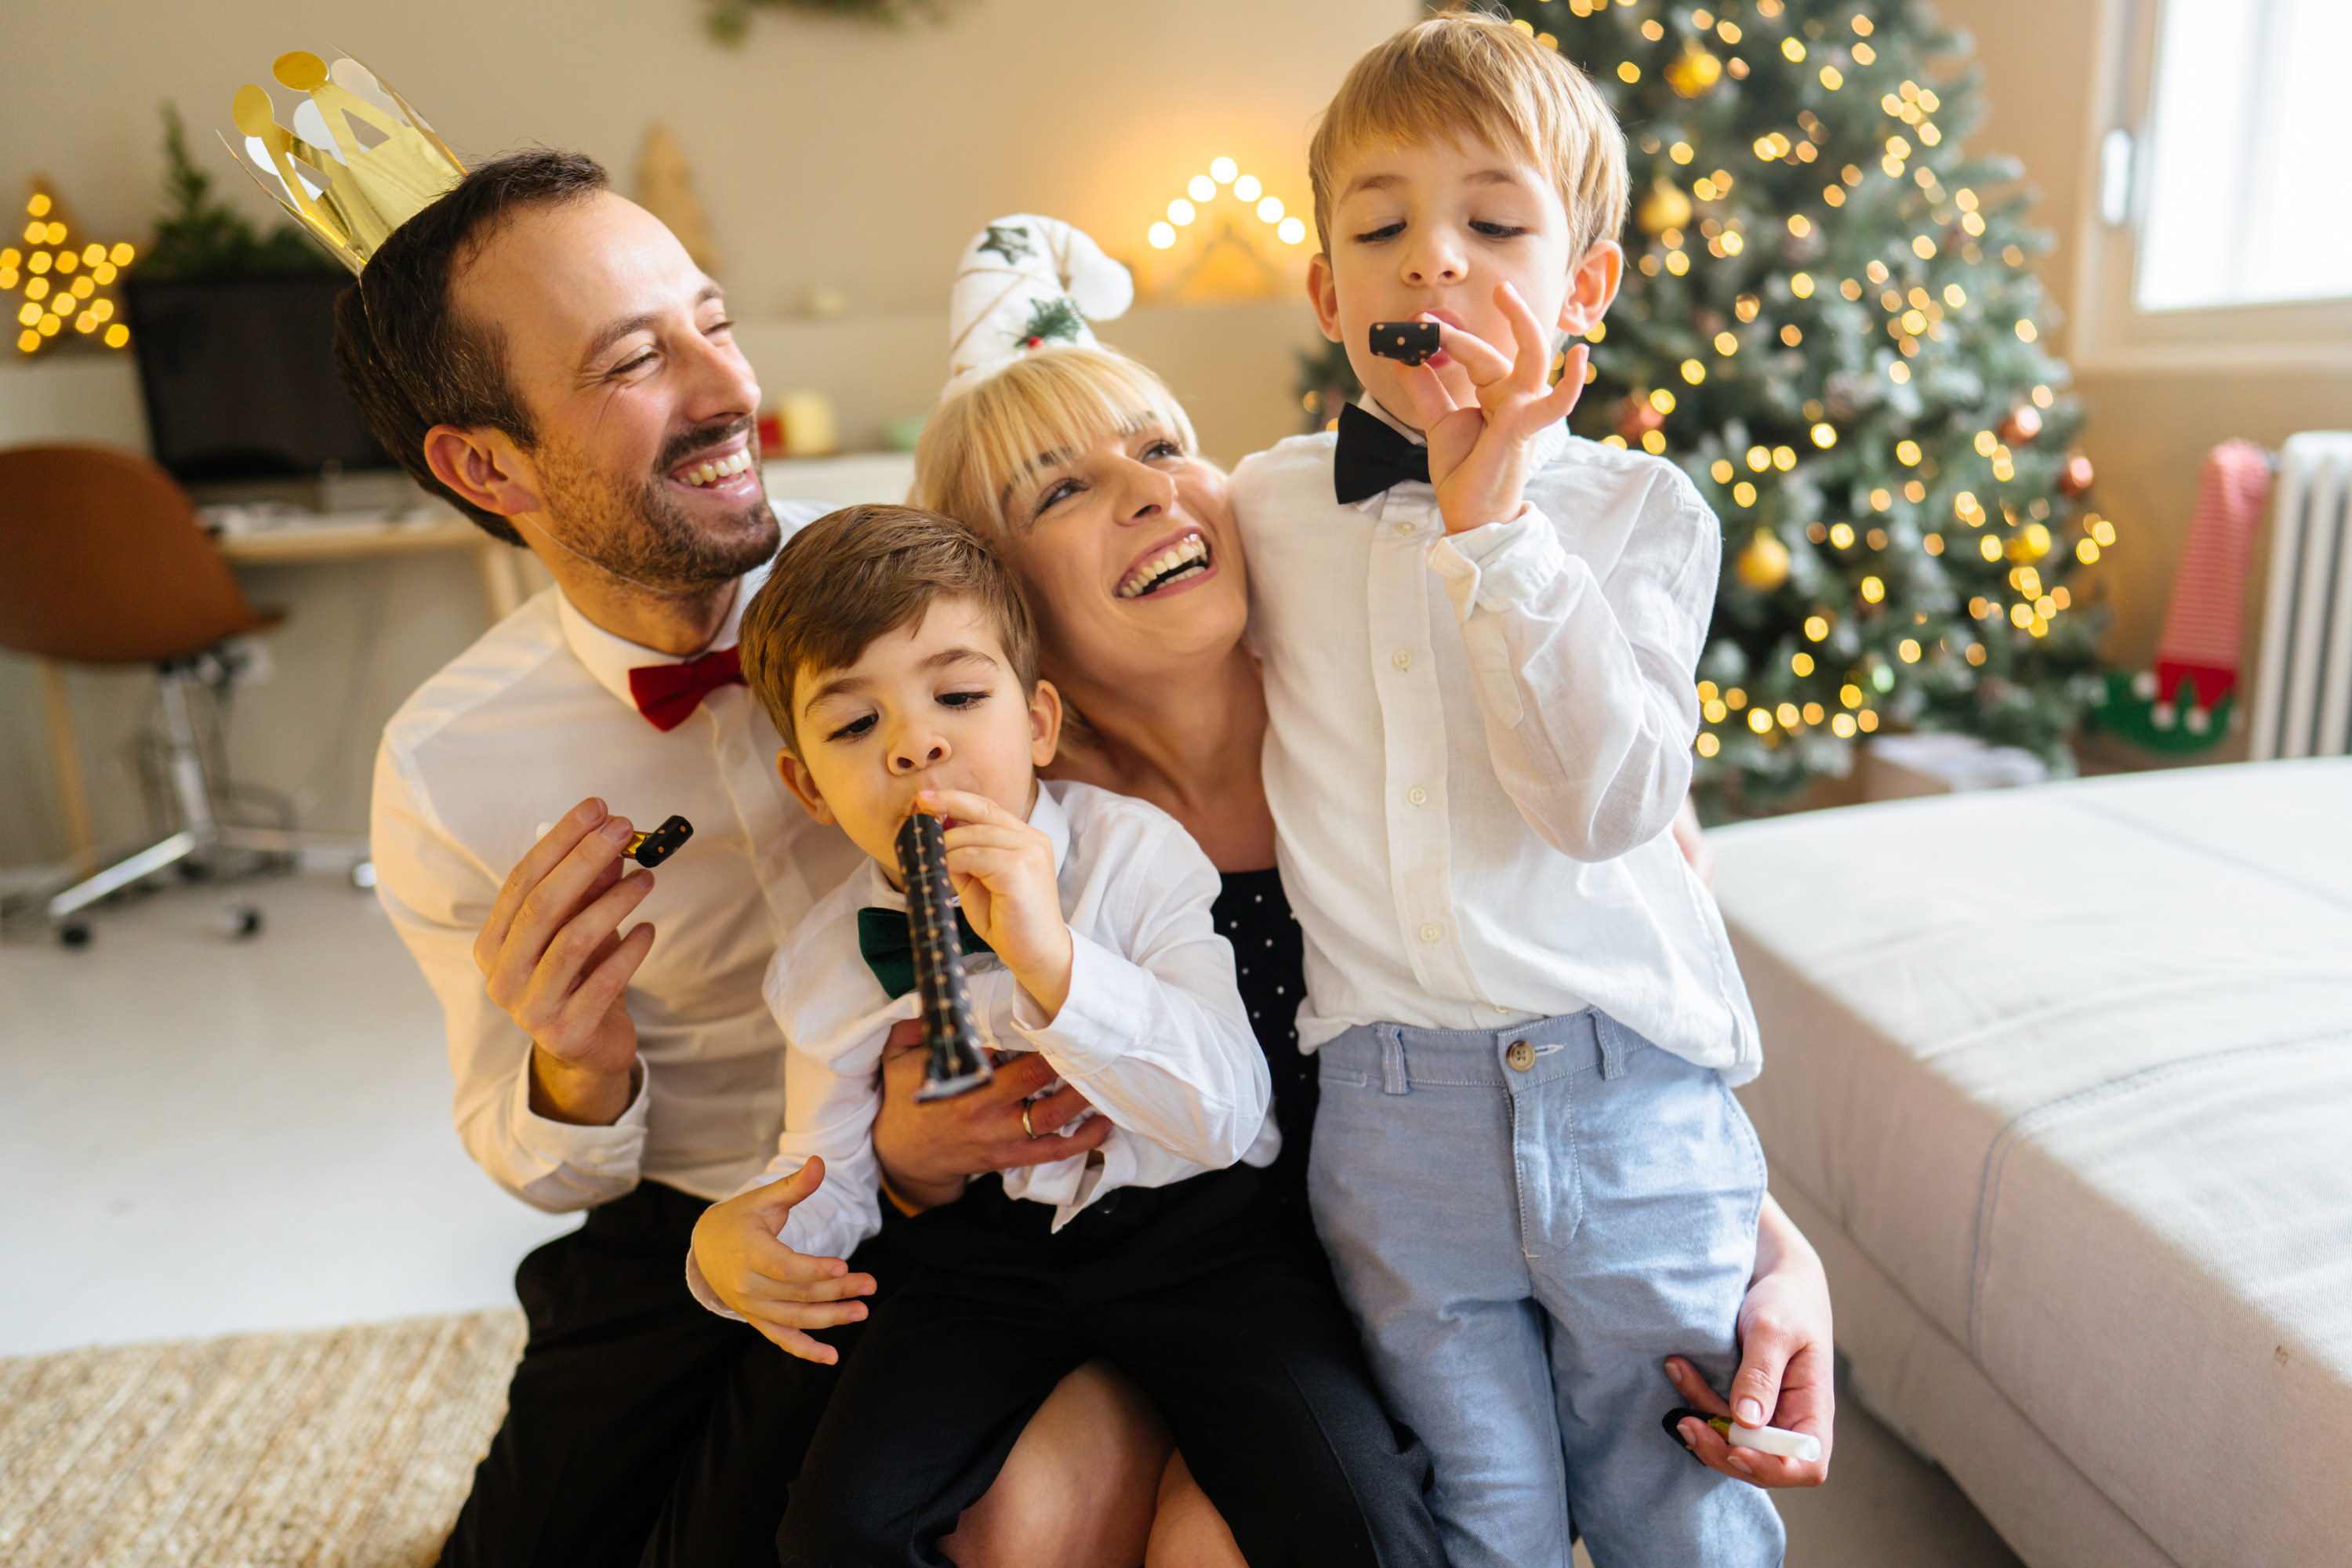 Photo of a family with two children celebrating Christmas and New Year holidays together at home